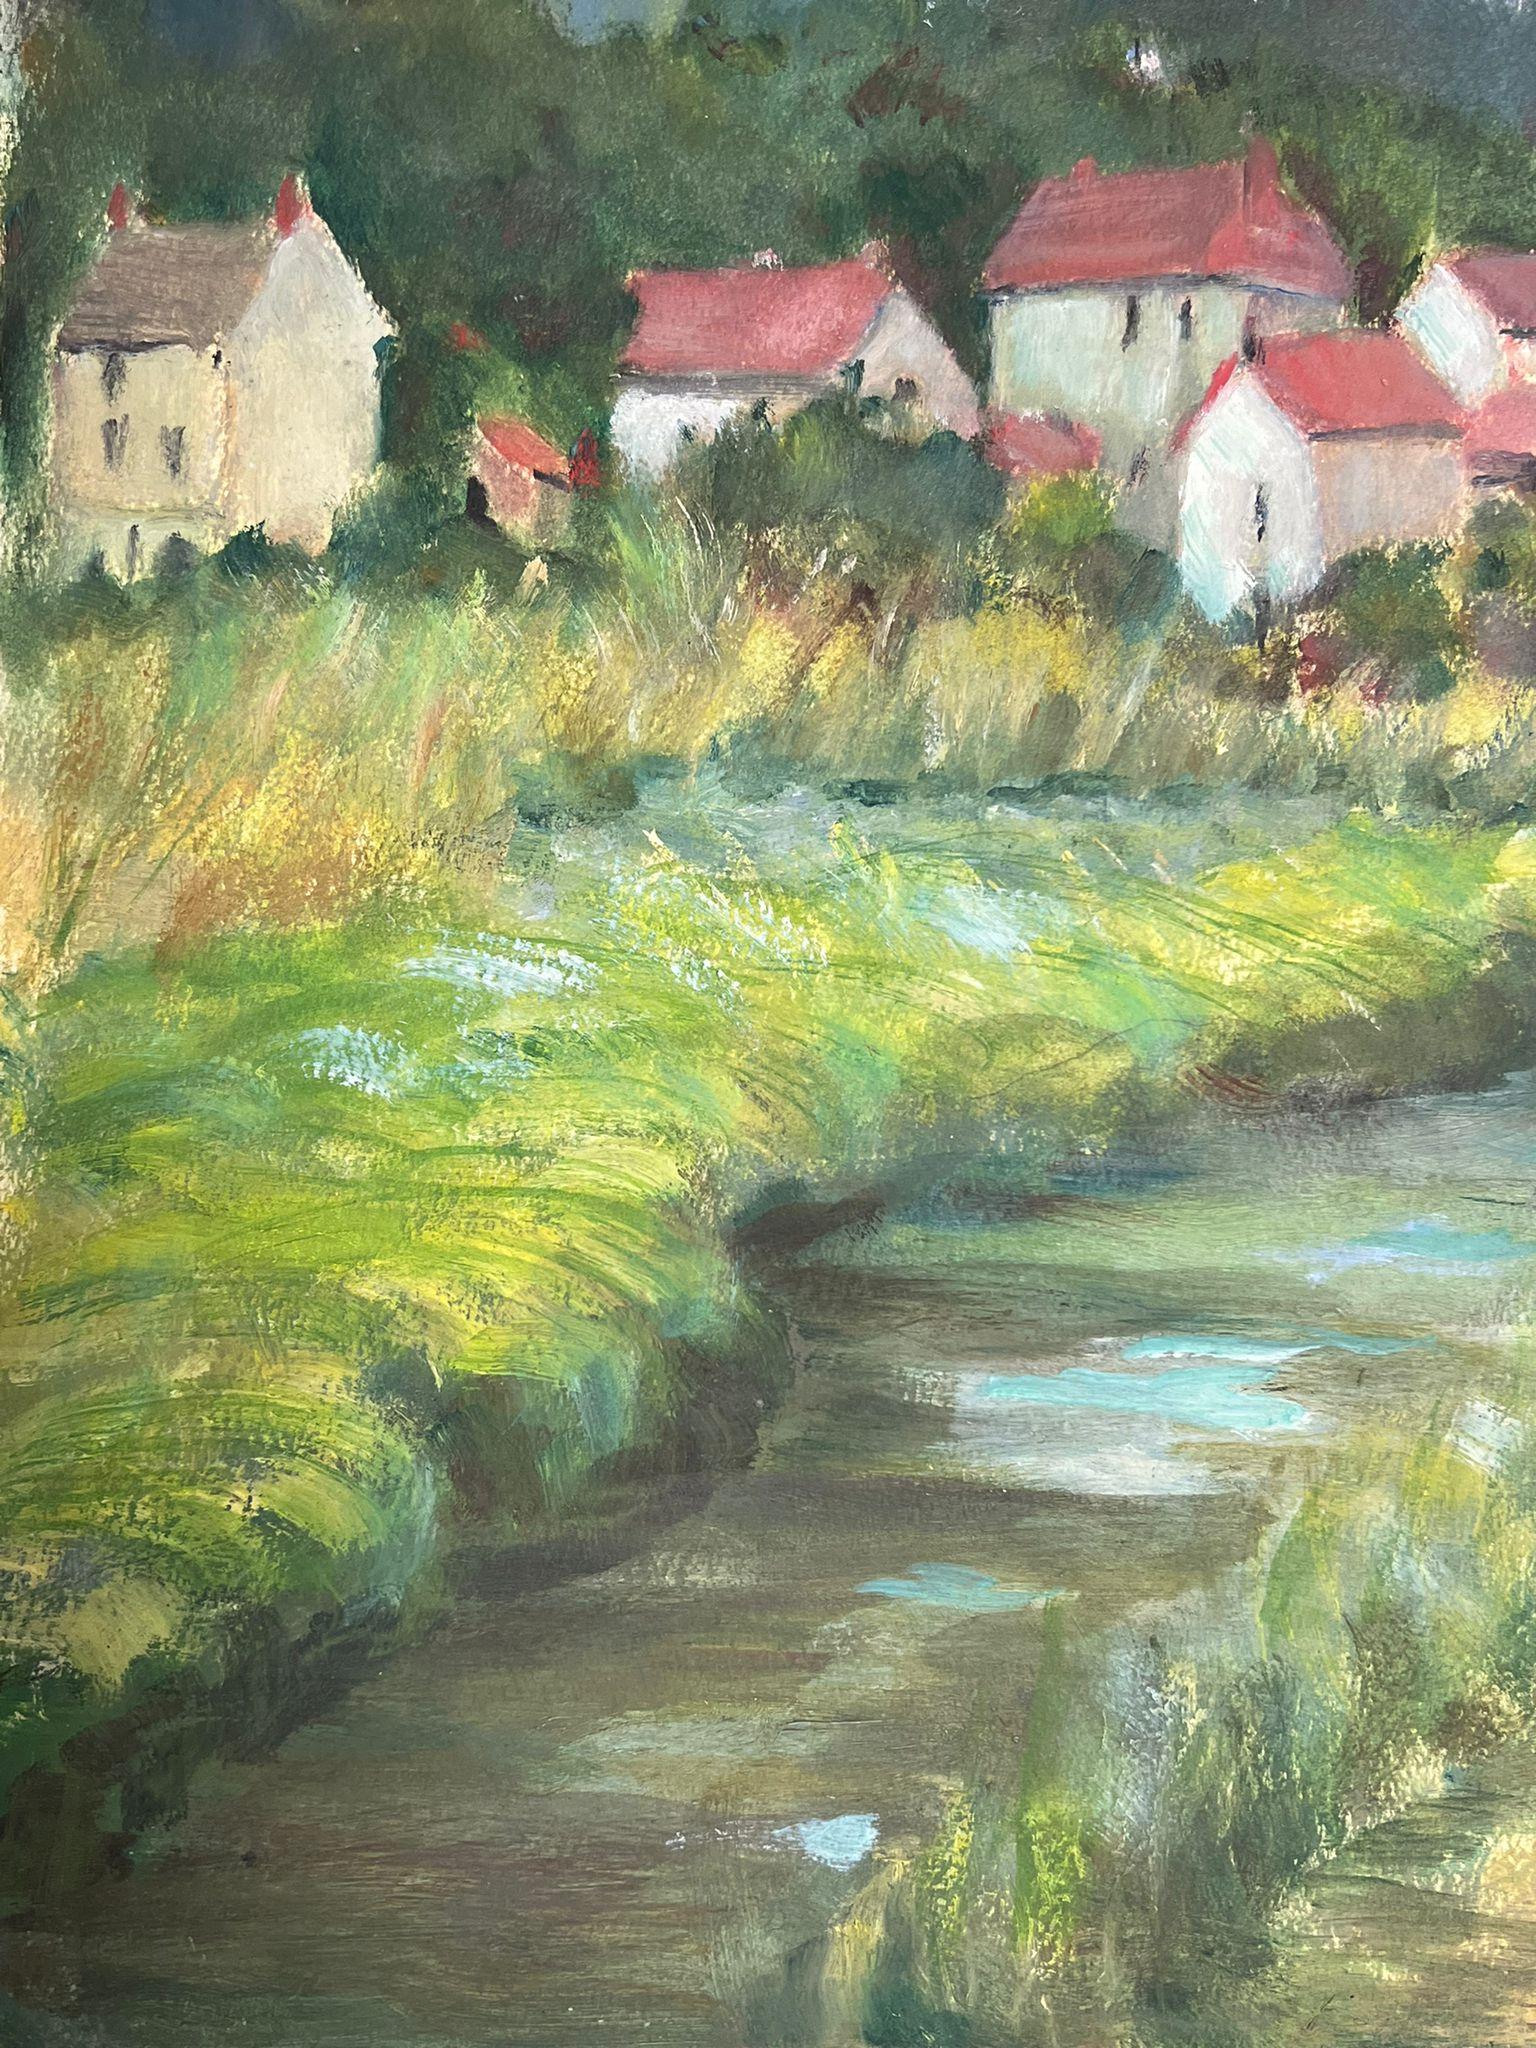 French Landscape
by Louise Alix, French 1950's Impressionist 
gouache on artist paper, unframed
painting: 15 x 18.5 inches
provenance: from a large private collection of this artists work in Northern France
condition: original, good and sound